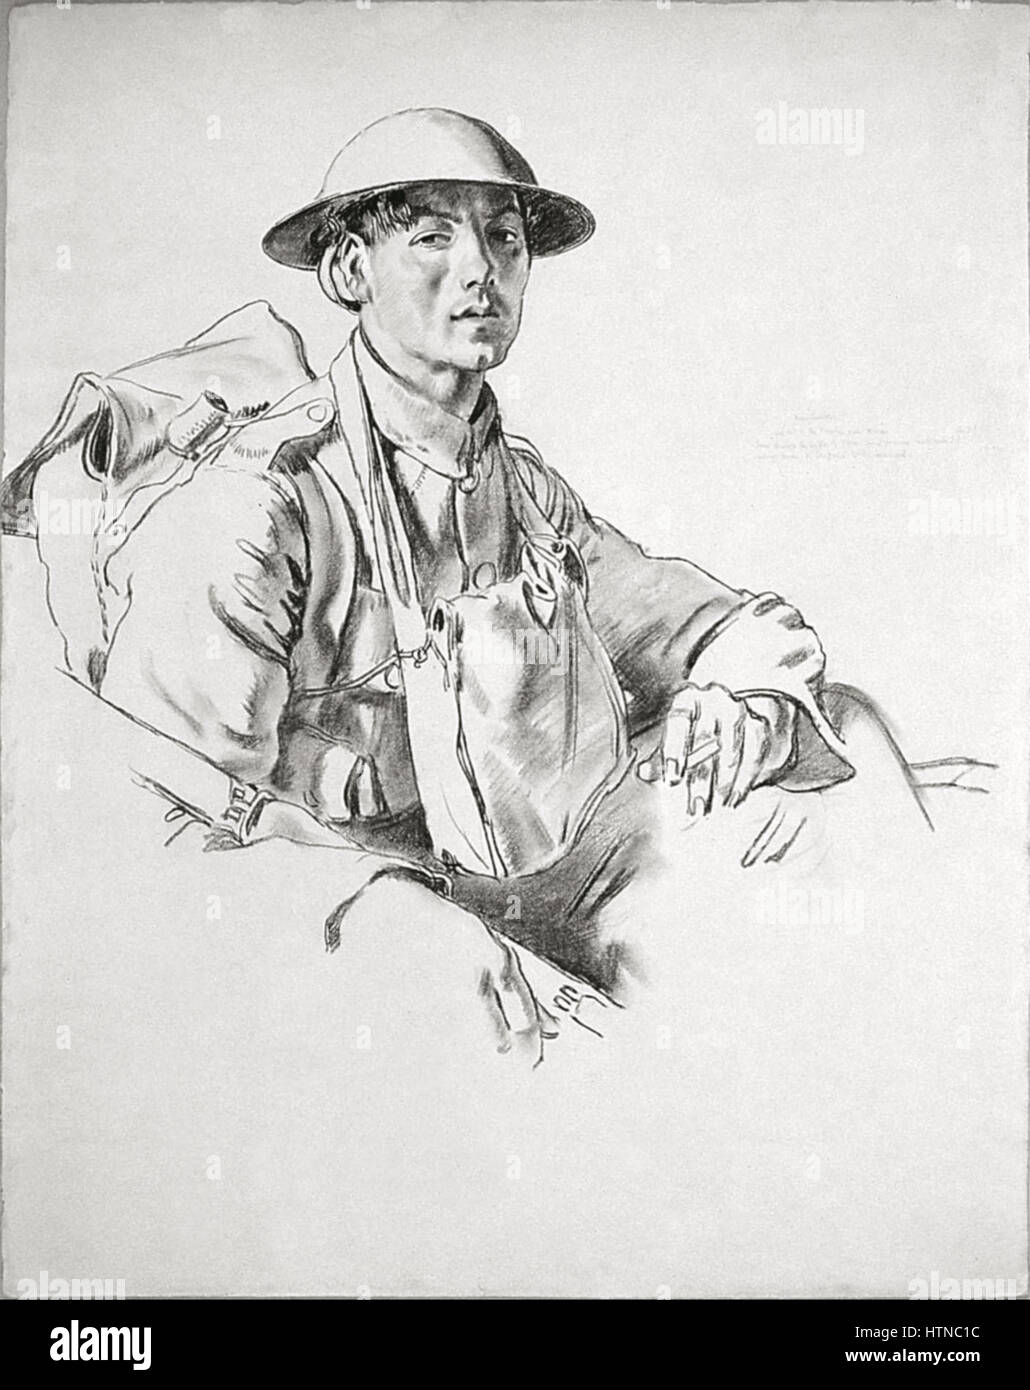 Orpen, William (Sir) (RA) - The Manchesters, Arras. 'Just out of the trenches near Arras. Been through the battles of Ypres and ... - Google Art Project Stock Photo